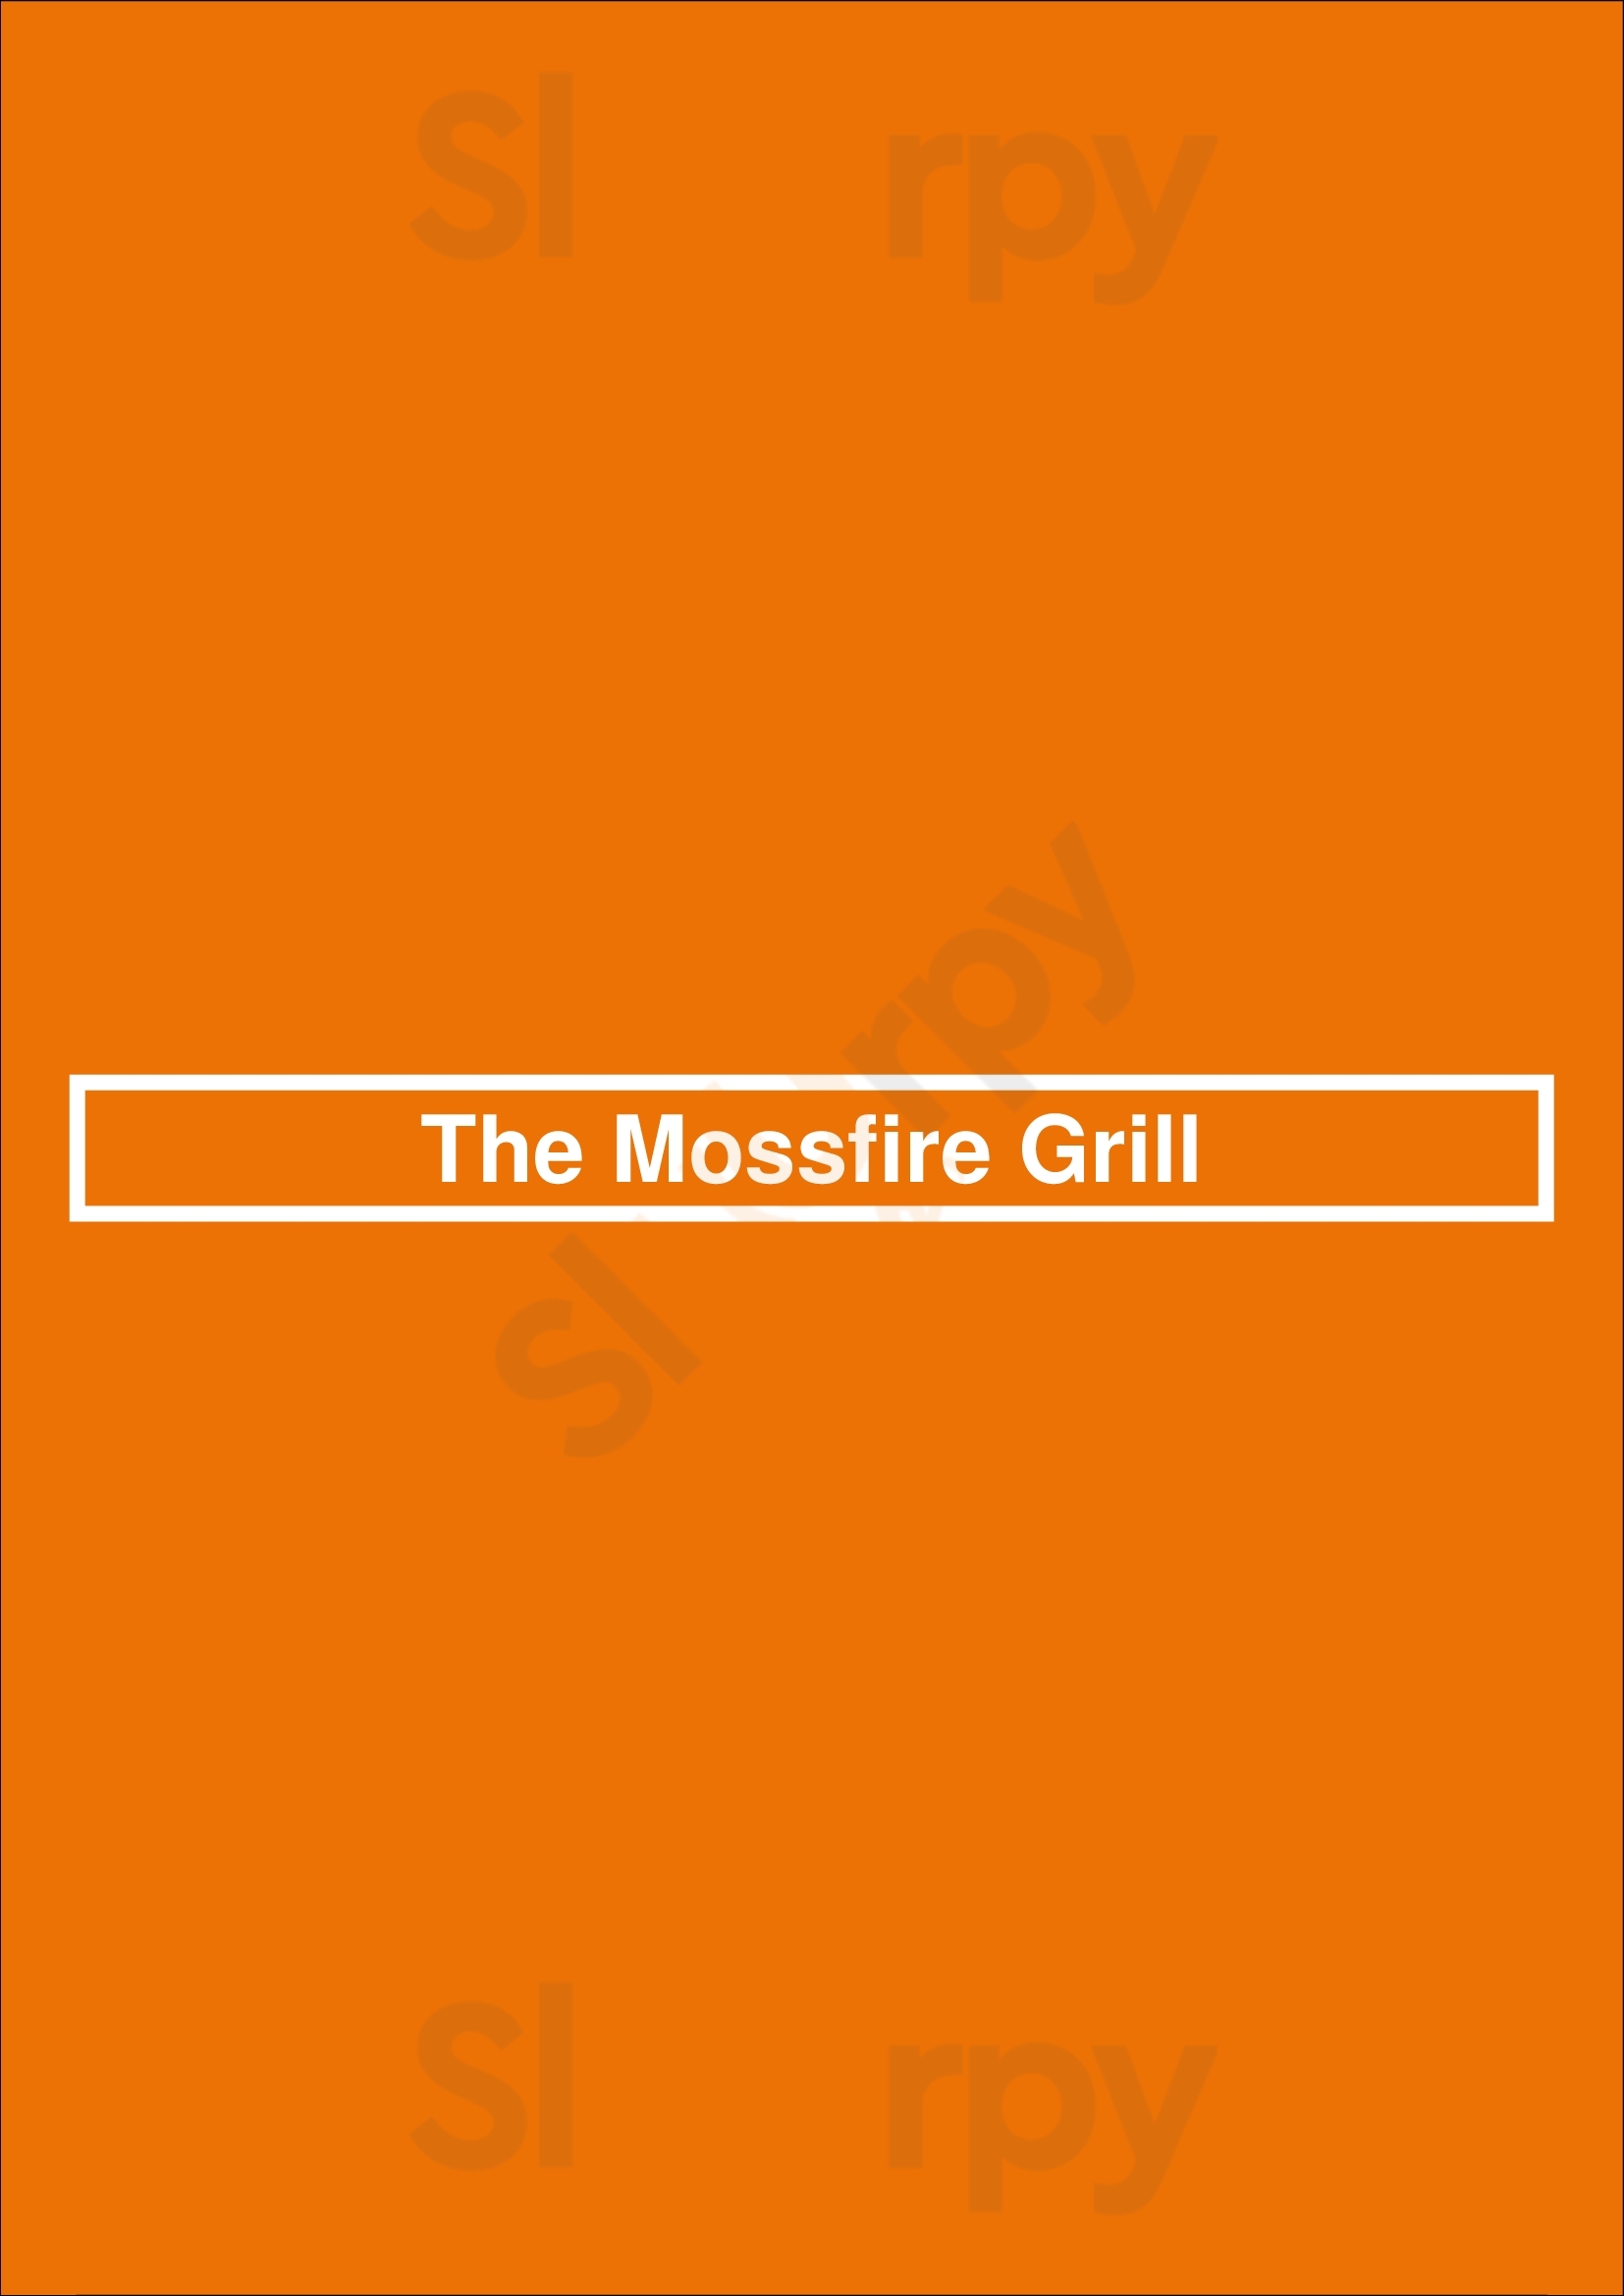 The Mossfire Grill Jacksonville Menu - 1